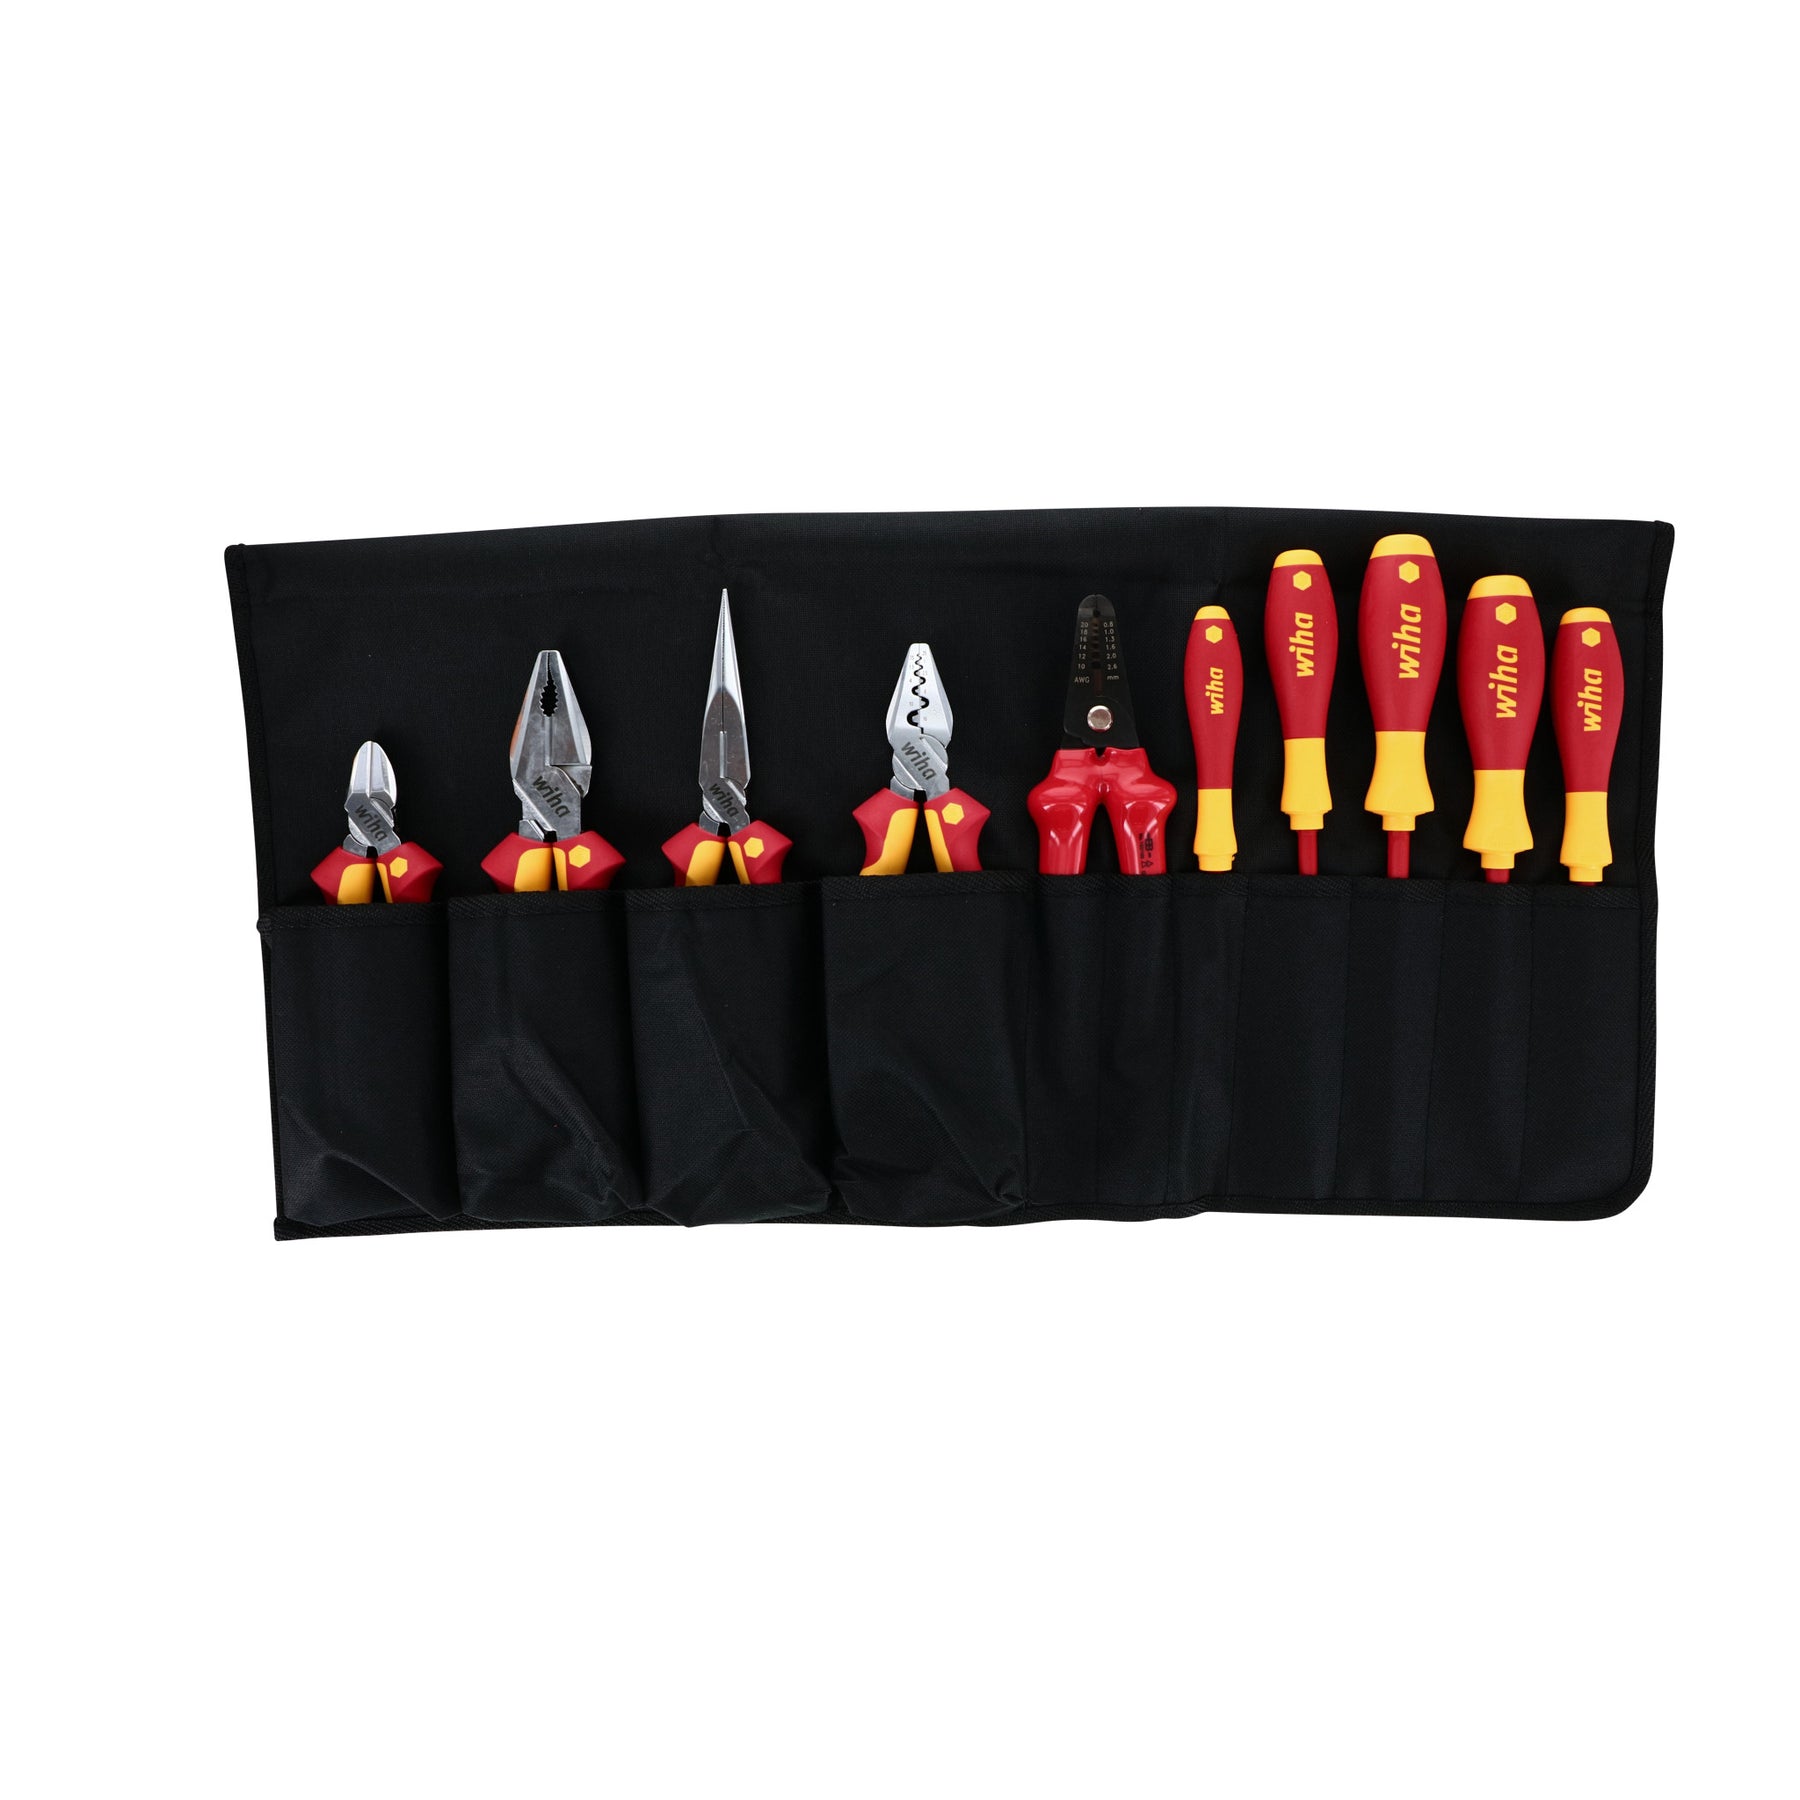 10 Piece Insulated Pliers and Screwdriver Set